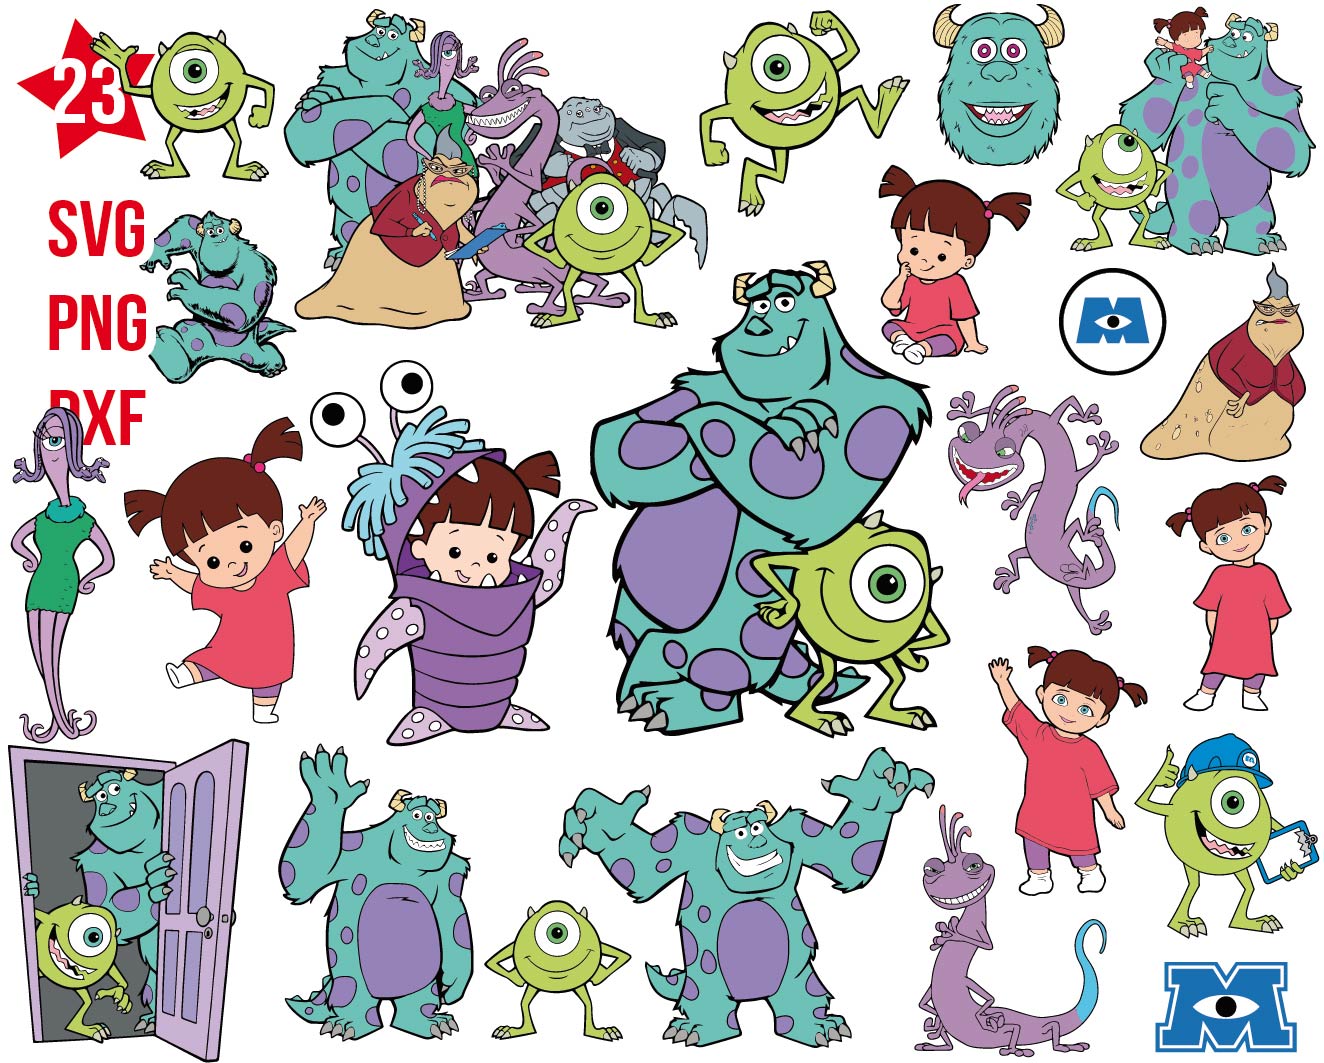 Monsters Inc svg, Monsters Inc png, Monsters University svg, Monsters